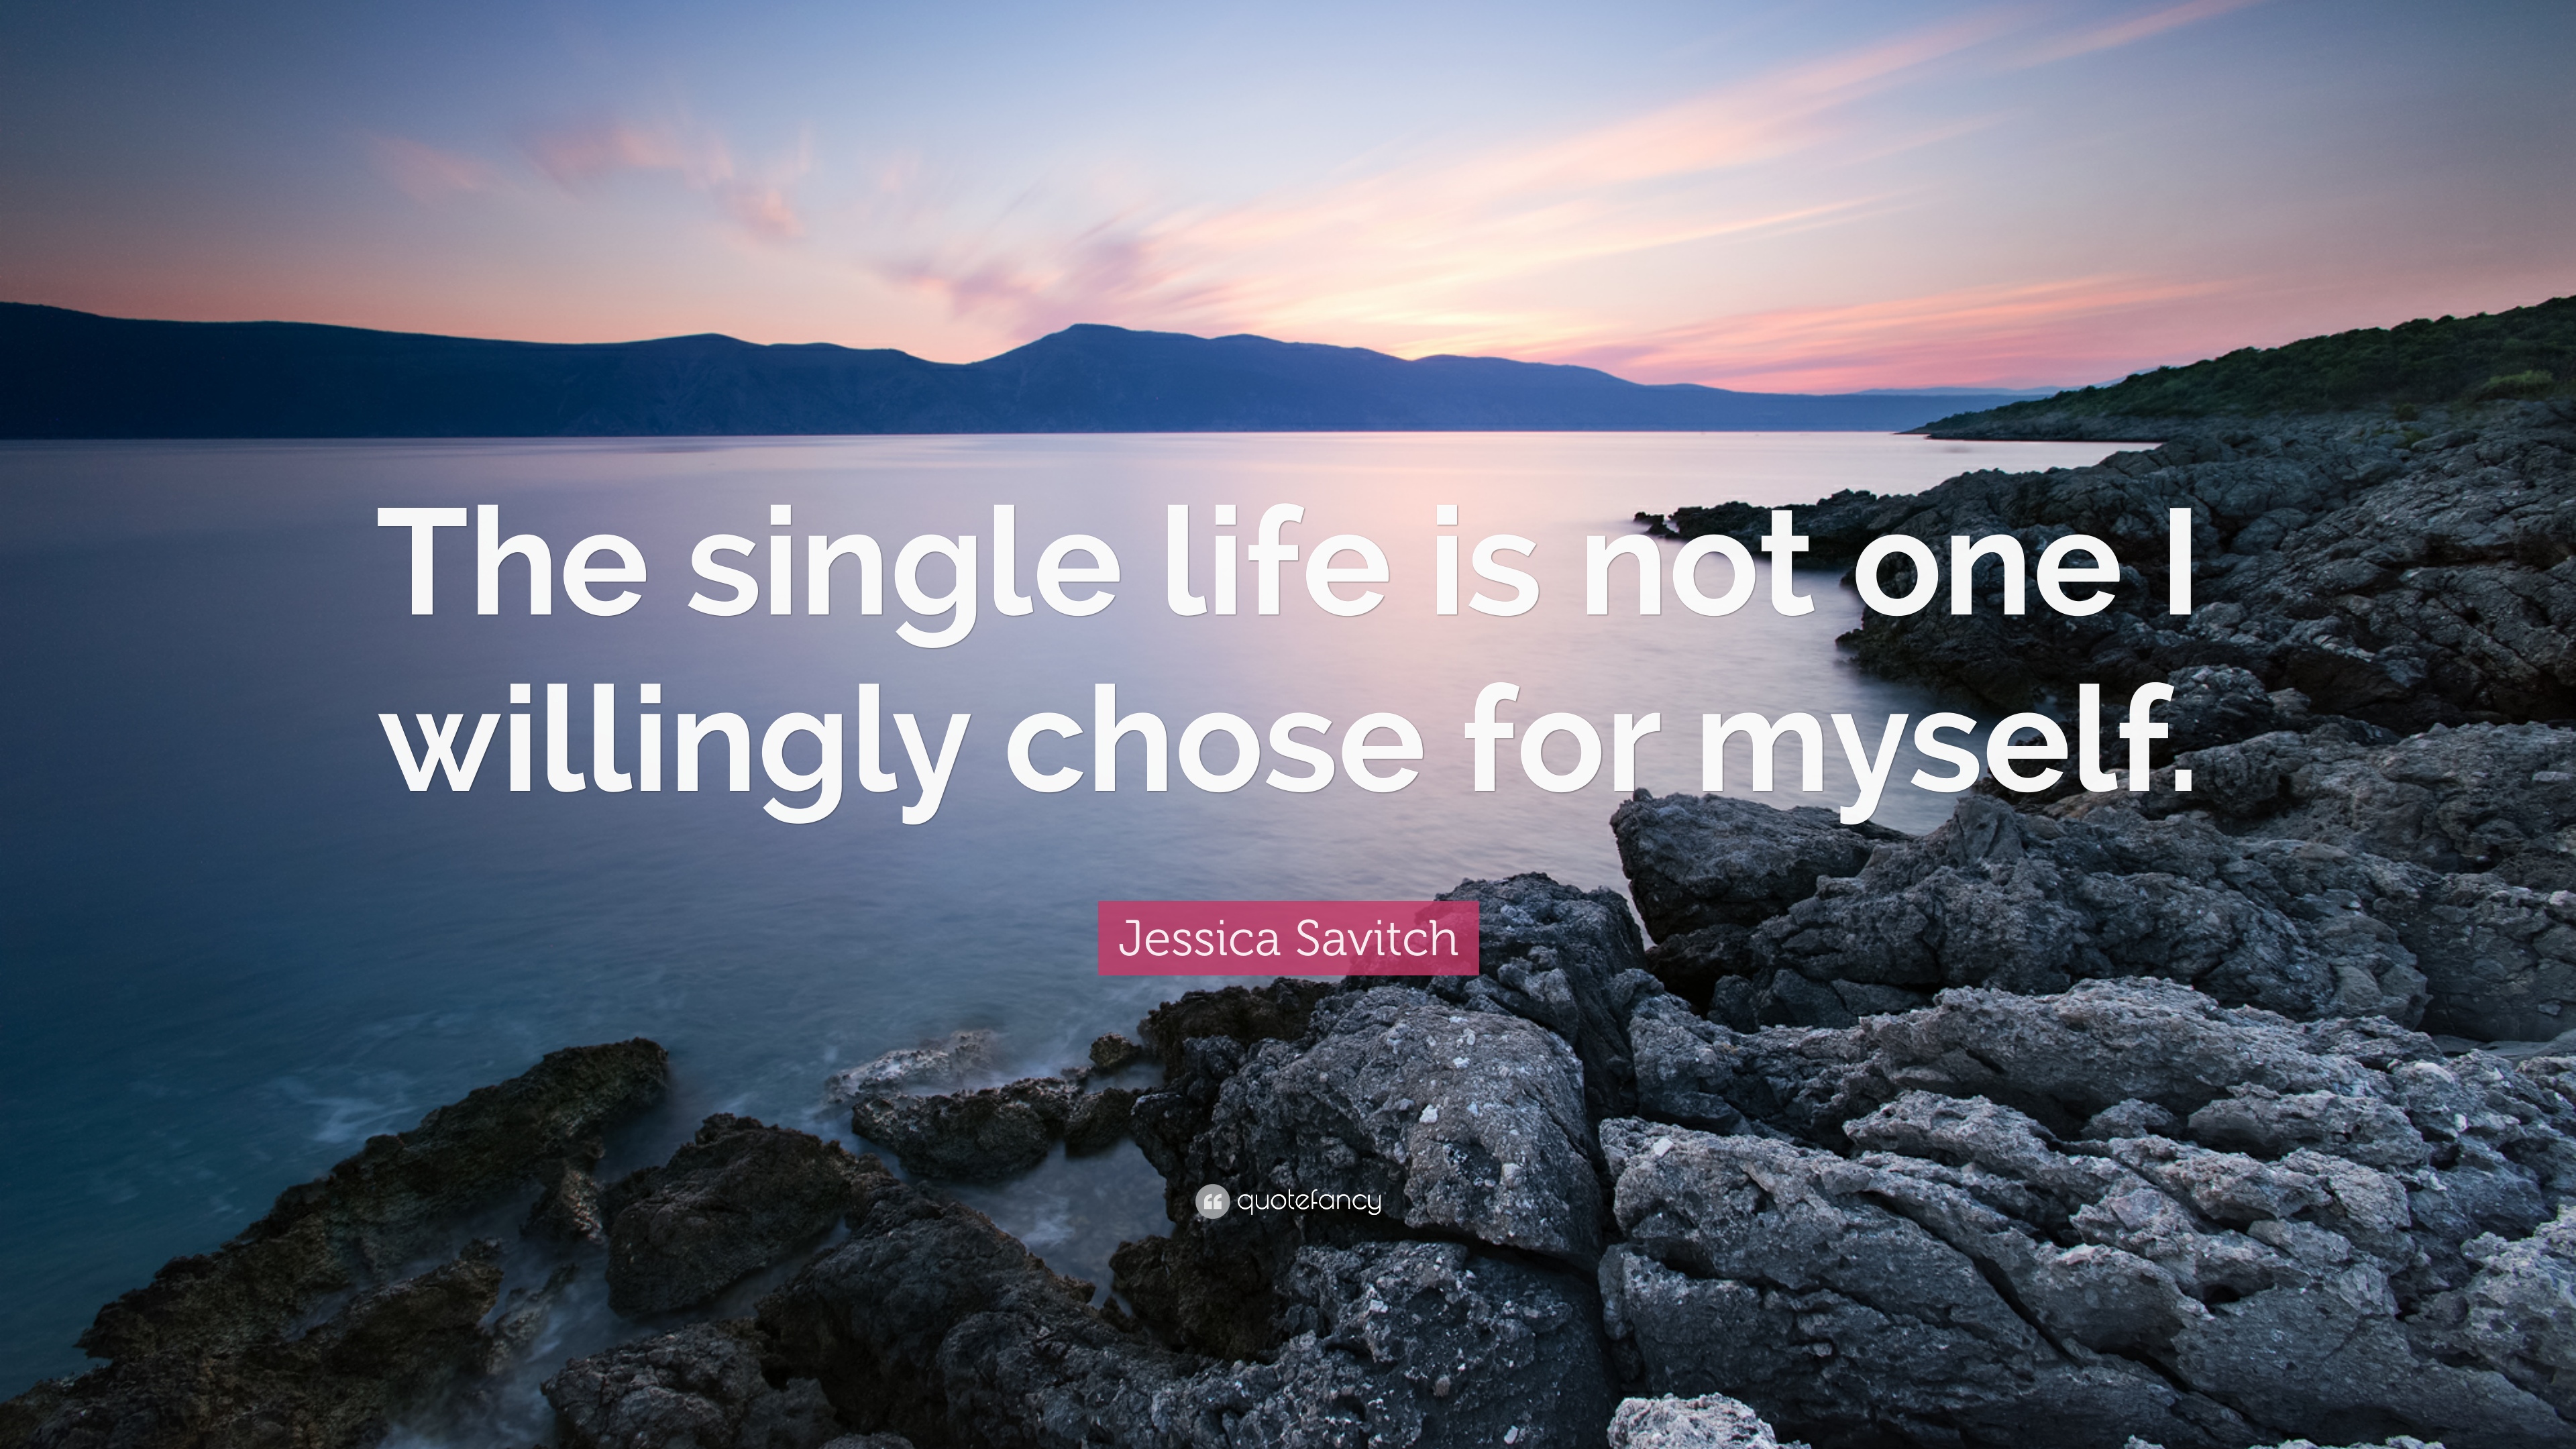 Jessica Savitch Quote: “The single life is not one I